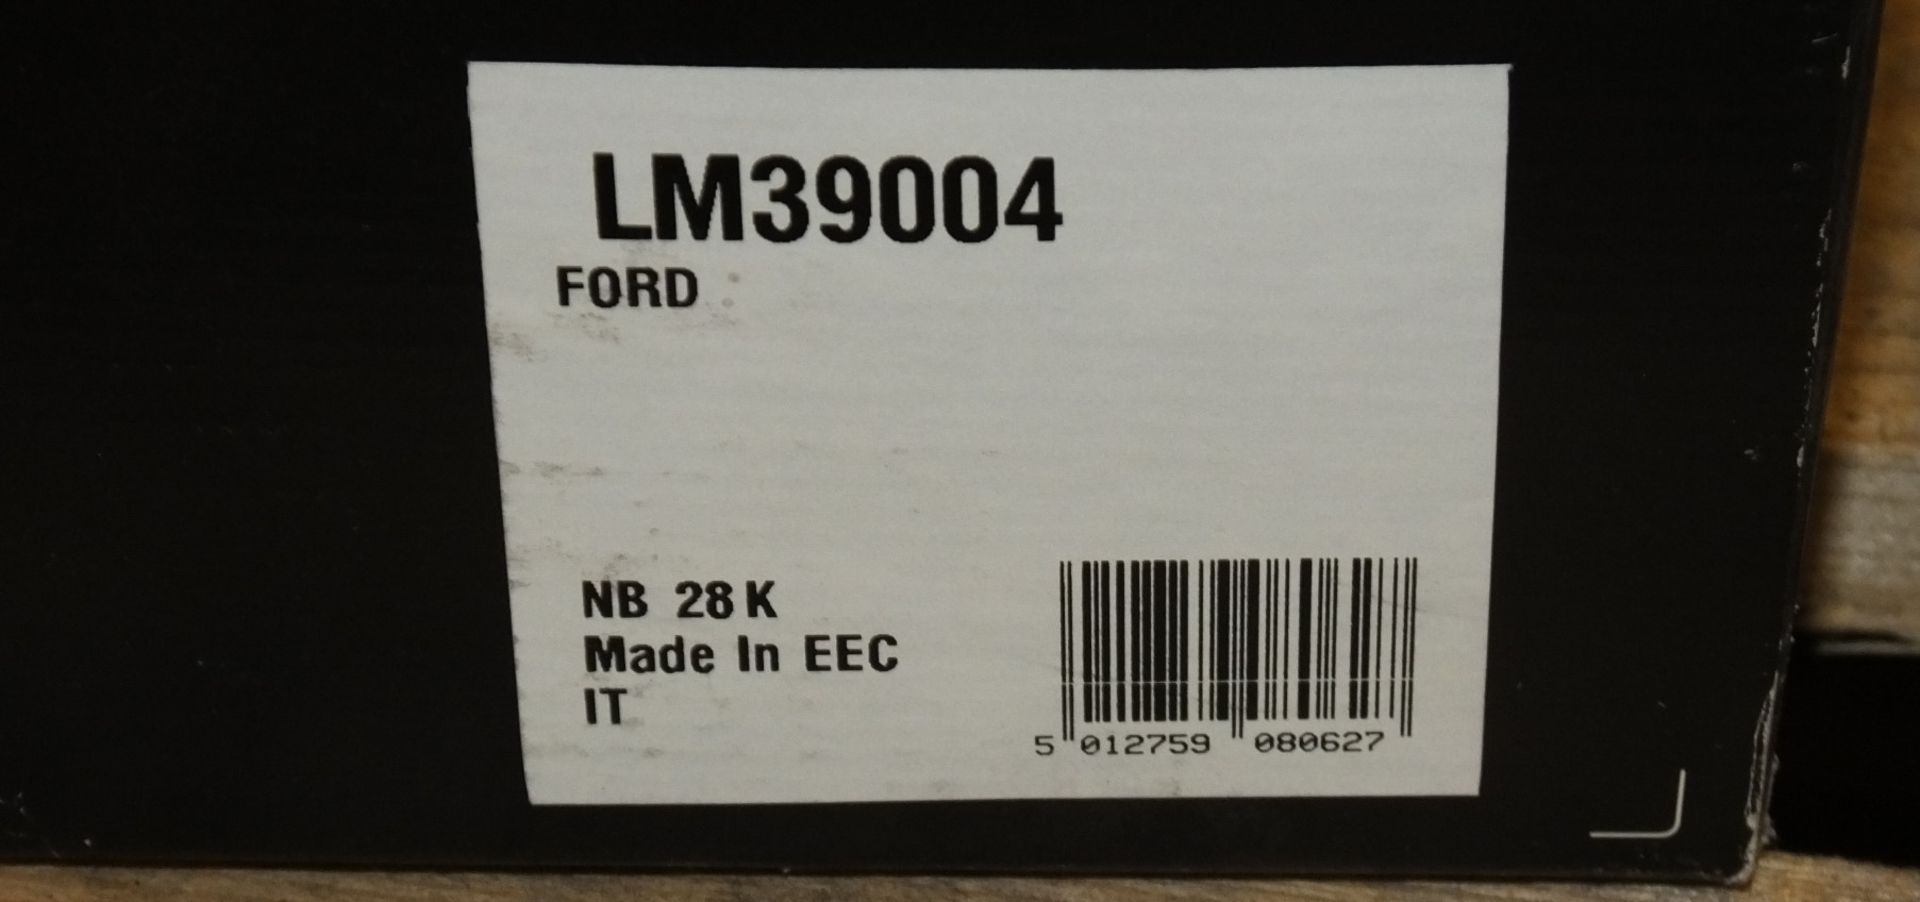 Delphi hydraulic part Ford LM39004 - Image 2 of 2